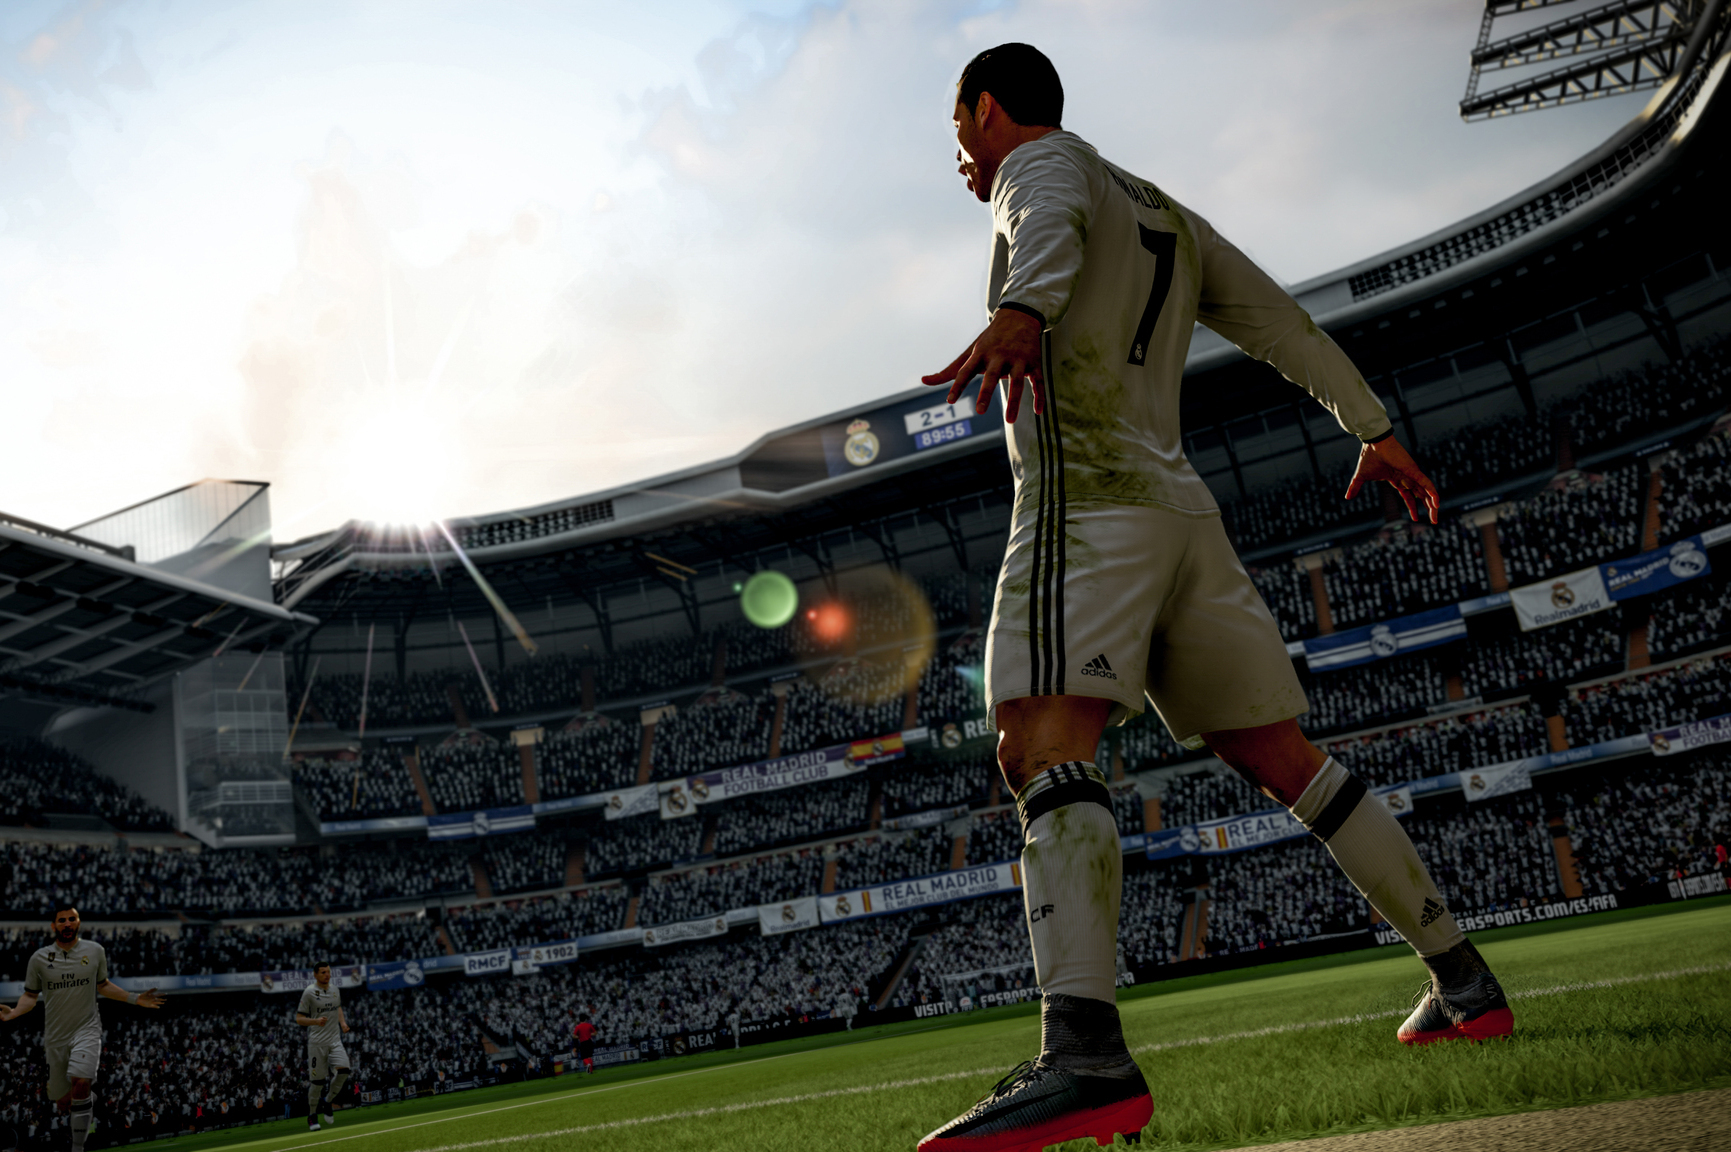 Fifa 18 review: The new journey mode is like a soap opera – and it's  brilliant, British GQ